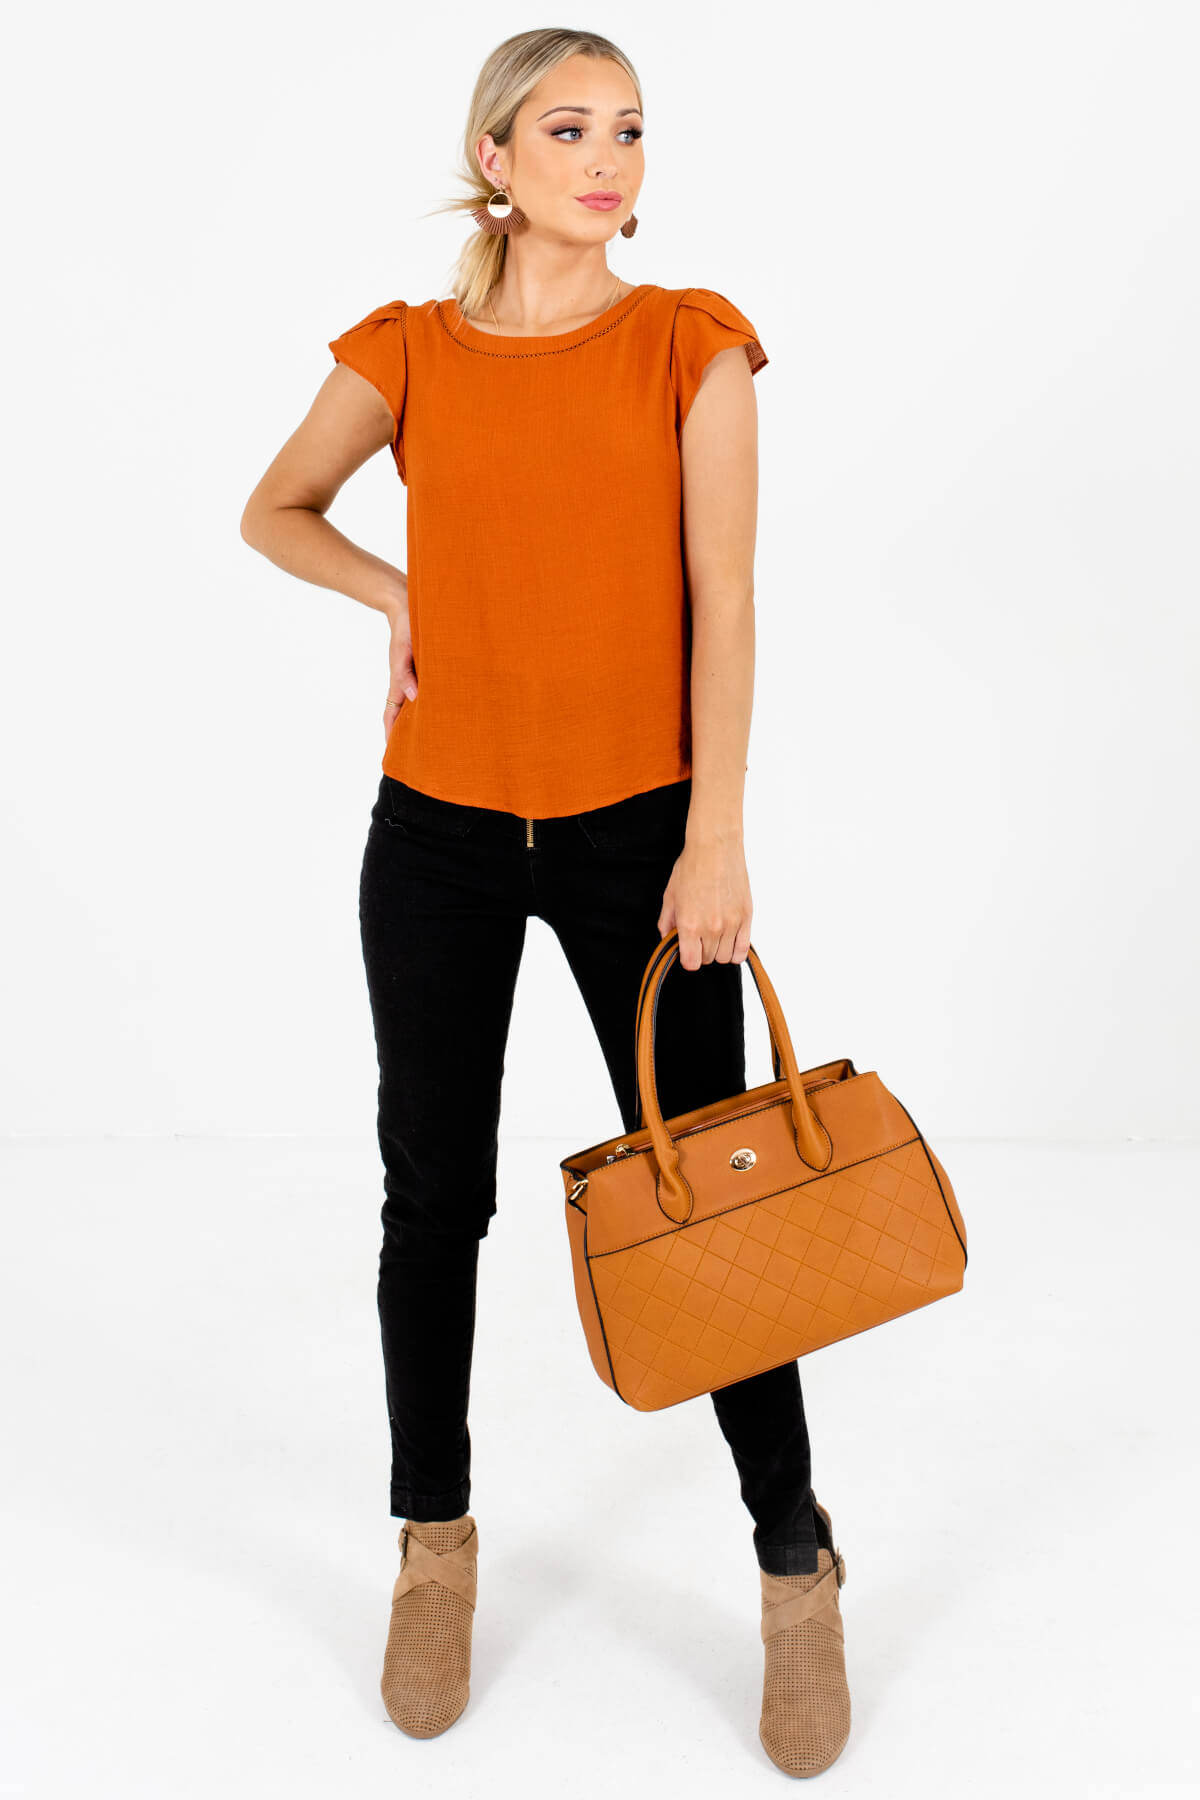 Women’s Burnt Orange Fall and Winter Boutique Clothing